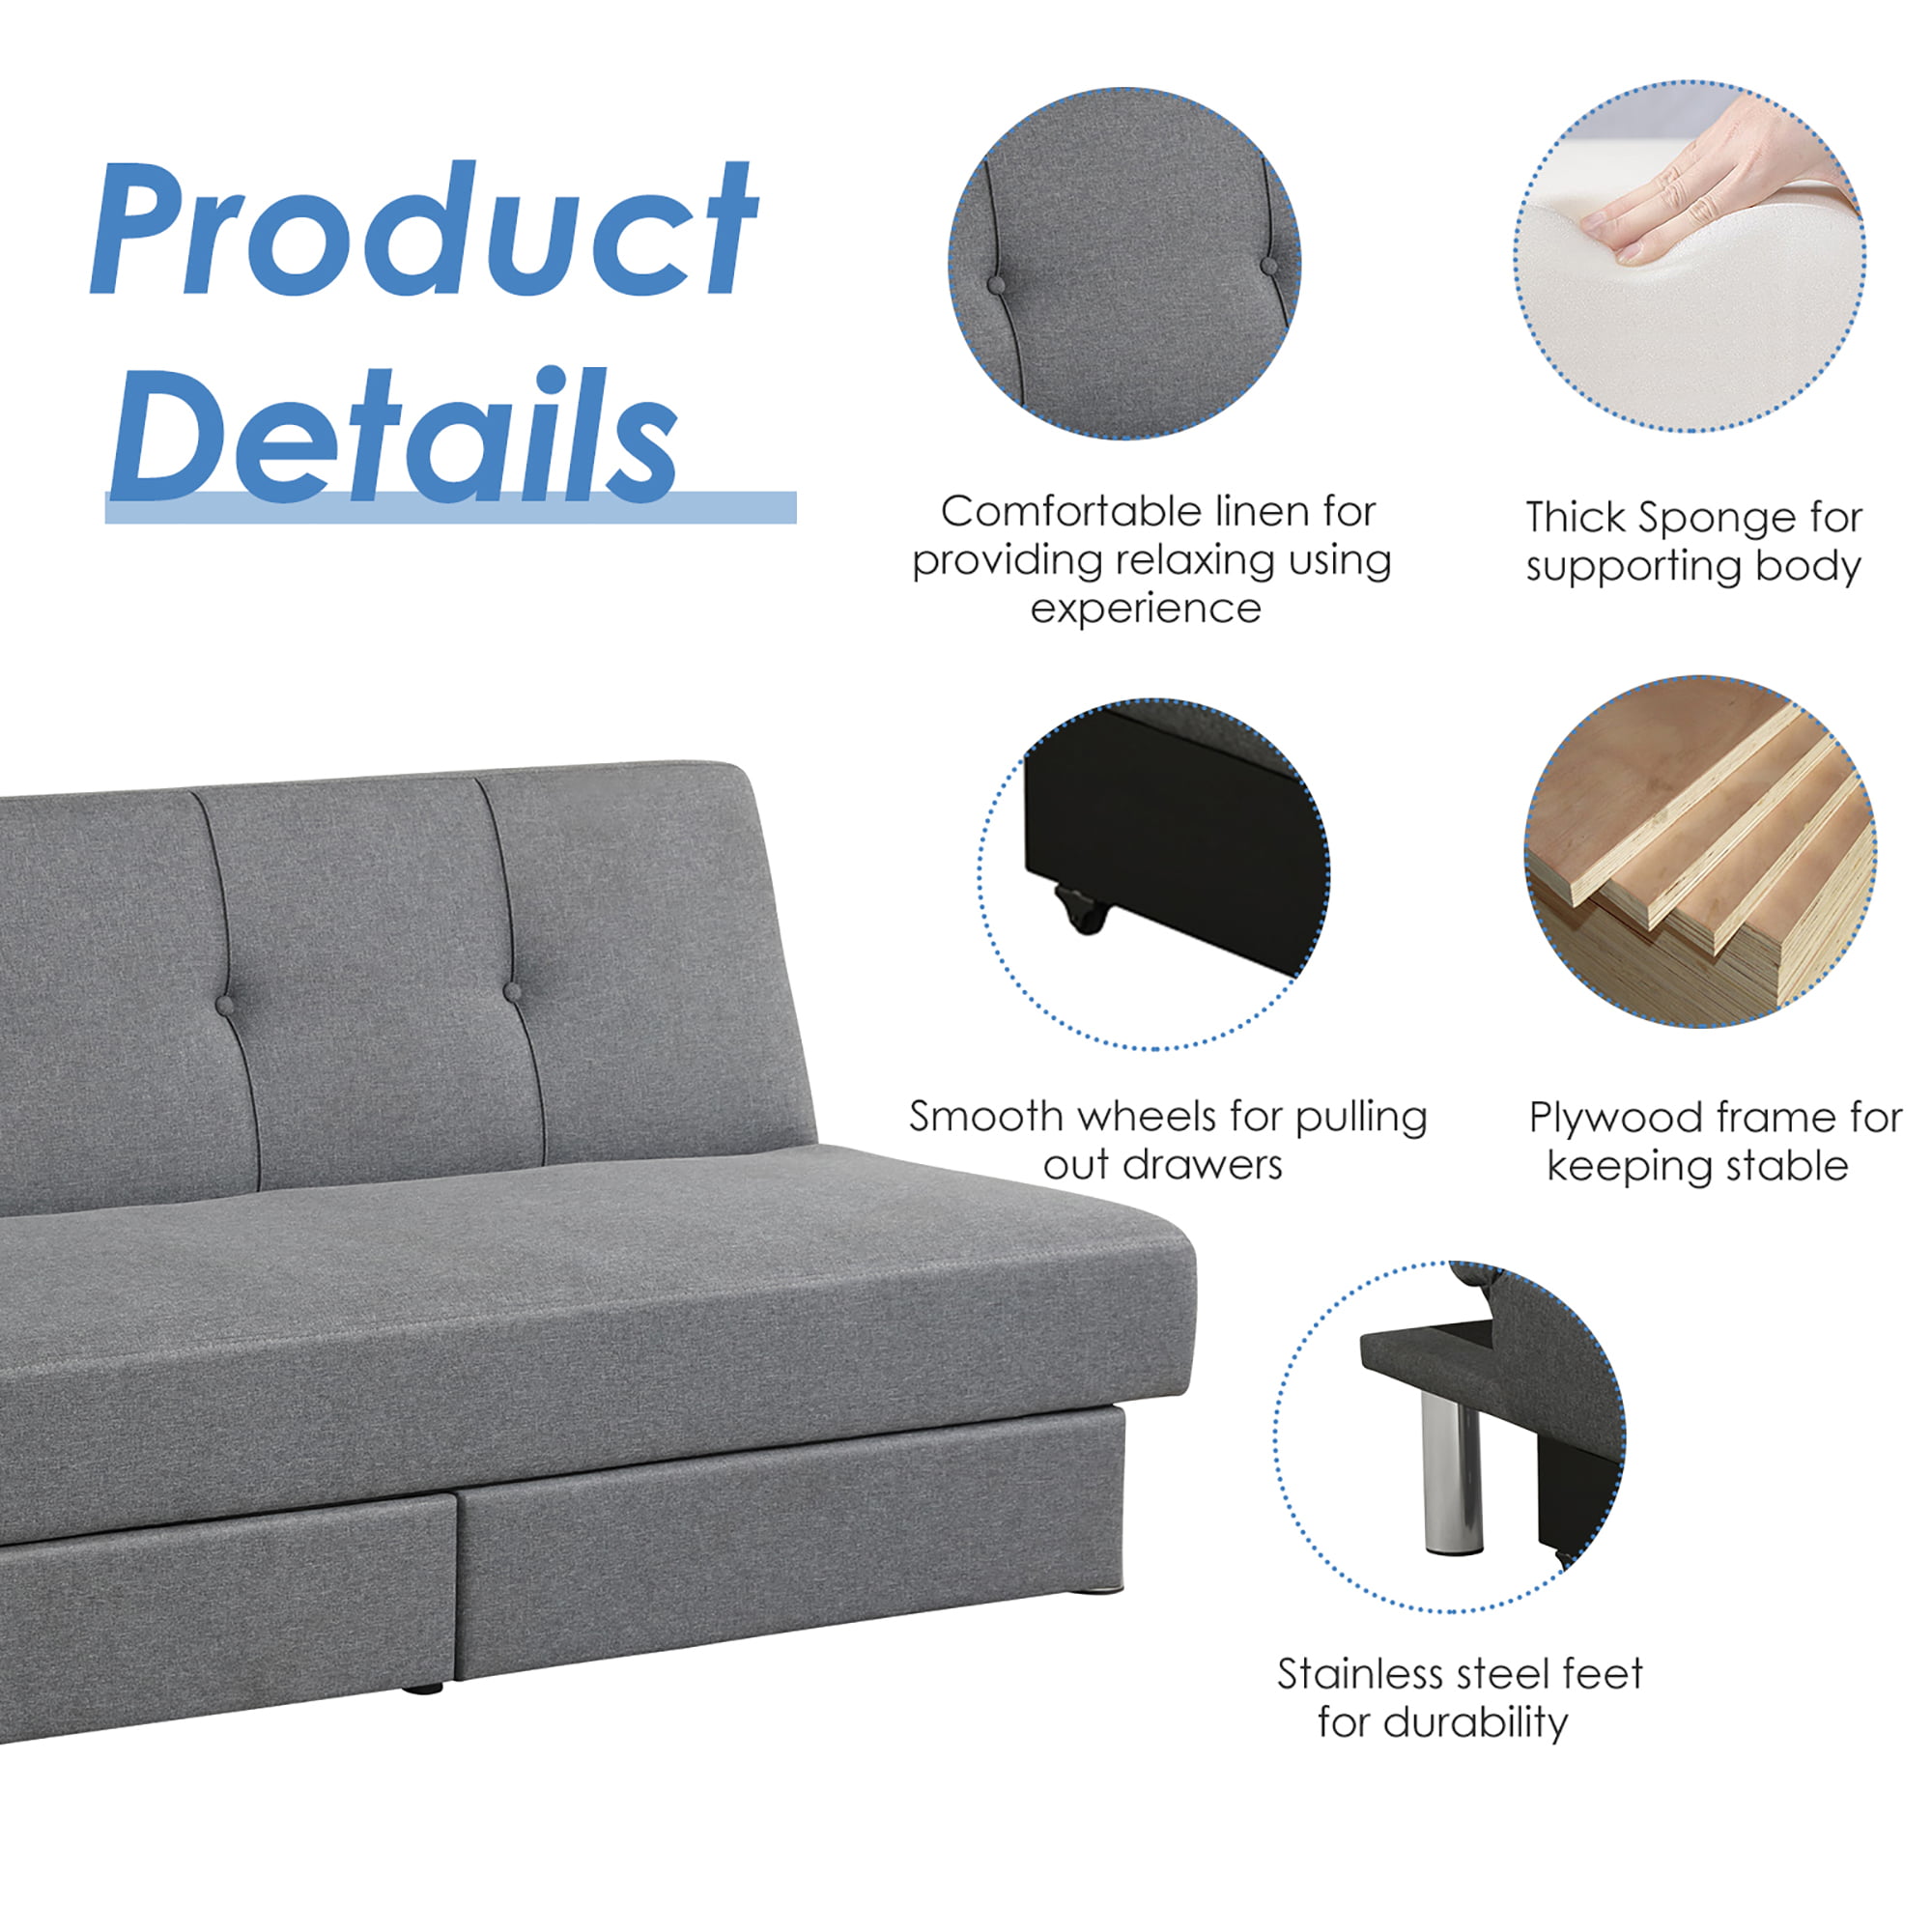 Details about   Costway Convertible Folding Futon Sofa Bed Fabric with Armrests Home Dark Grey 